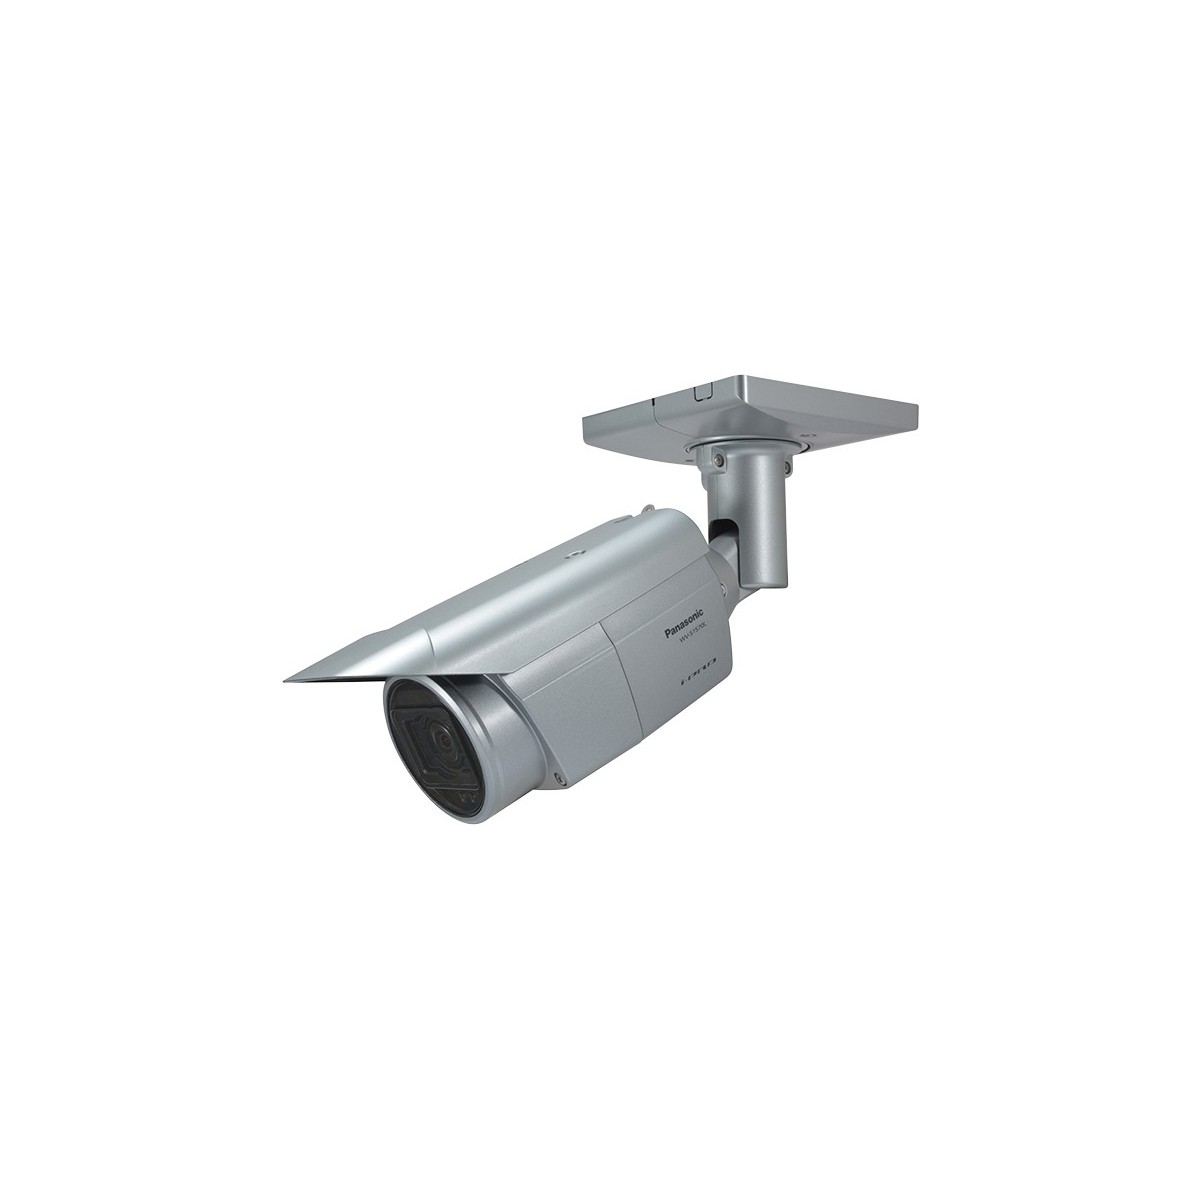 Panasonic WV-S1570L - IP security camera - Outdoor - Wired - Bullet - Ceiling/wall - Silver